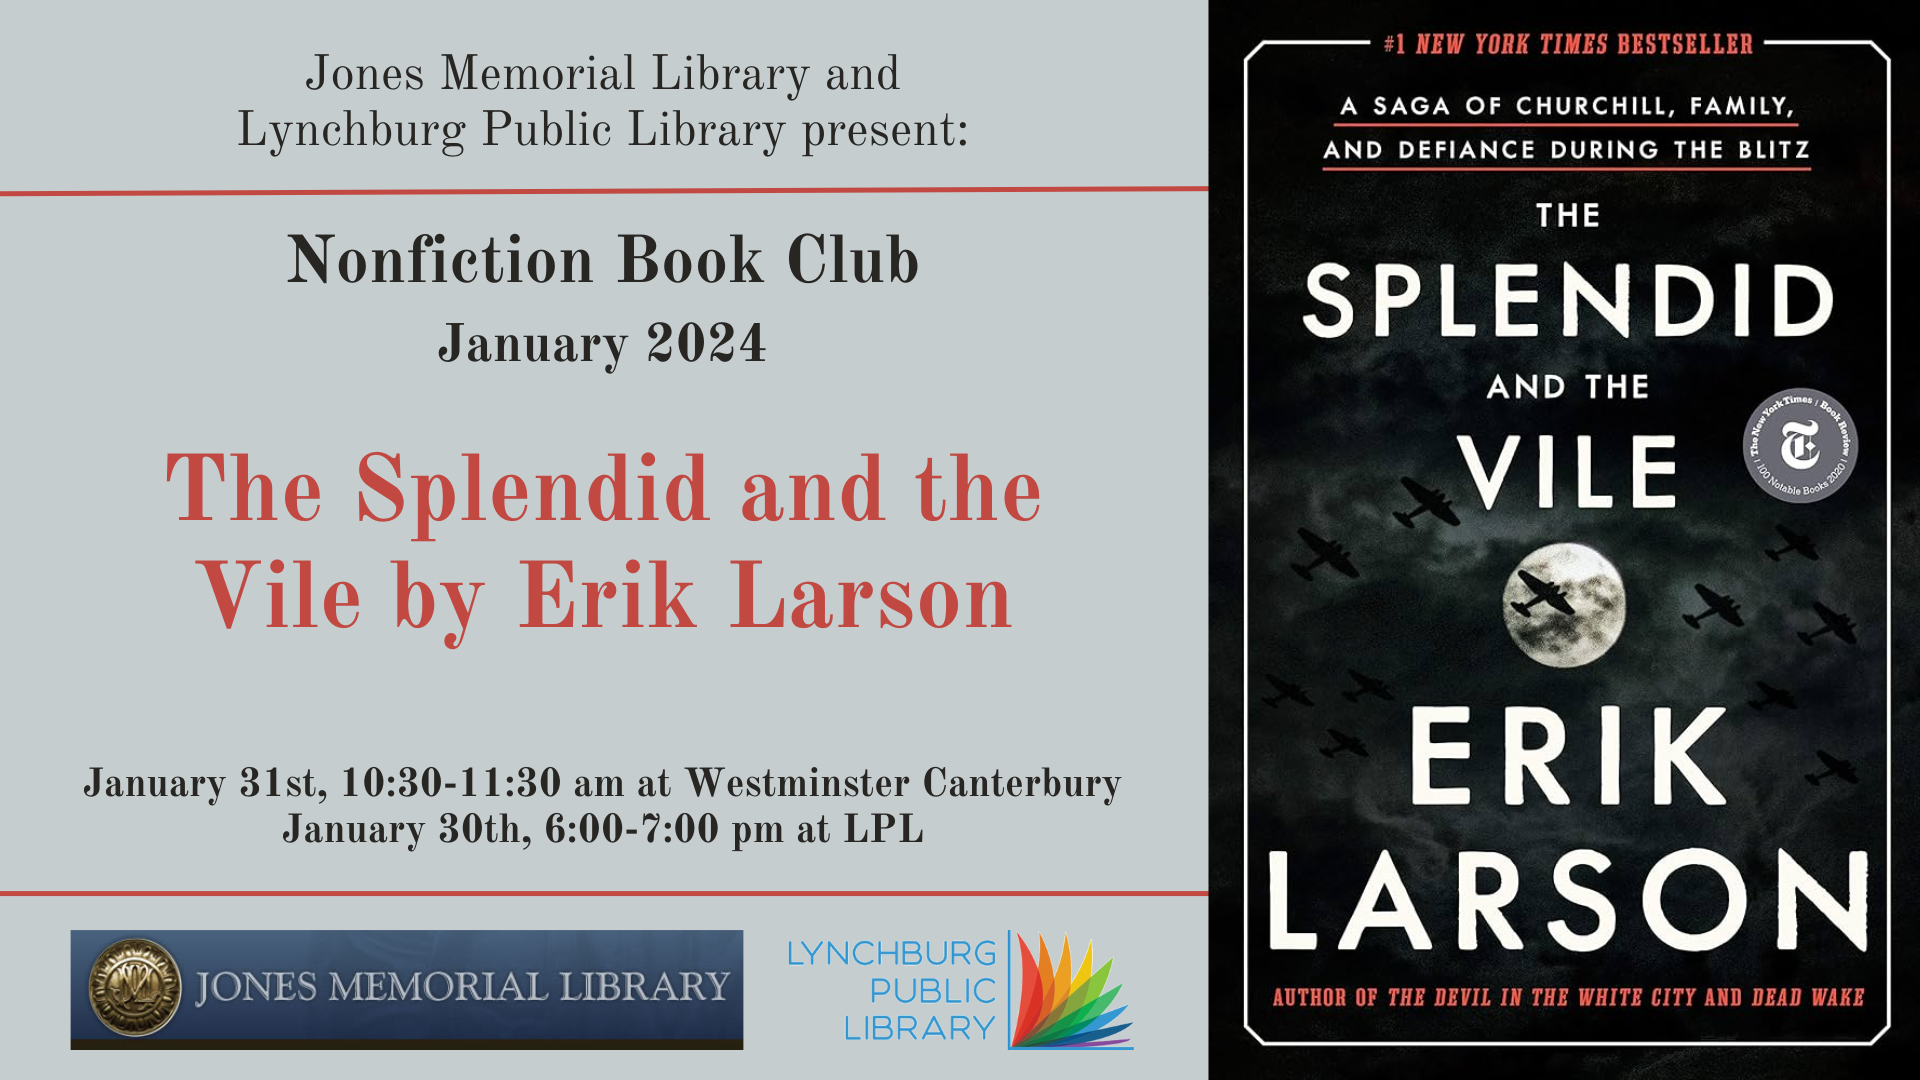 Jones Memorial Library and Lynchburg Public Library present: Nonfiction Book Club January 2024; The Splendid and the Vile by Erik Larson; January 30th, 6:00-7:00 pm at LPL; January 31st, 10:30-11:30 am at Westminster Canterbury